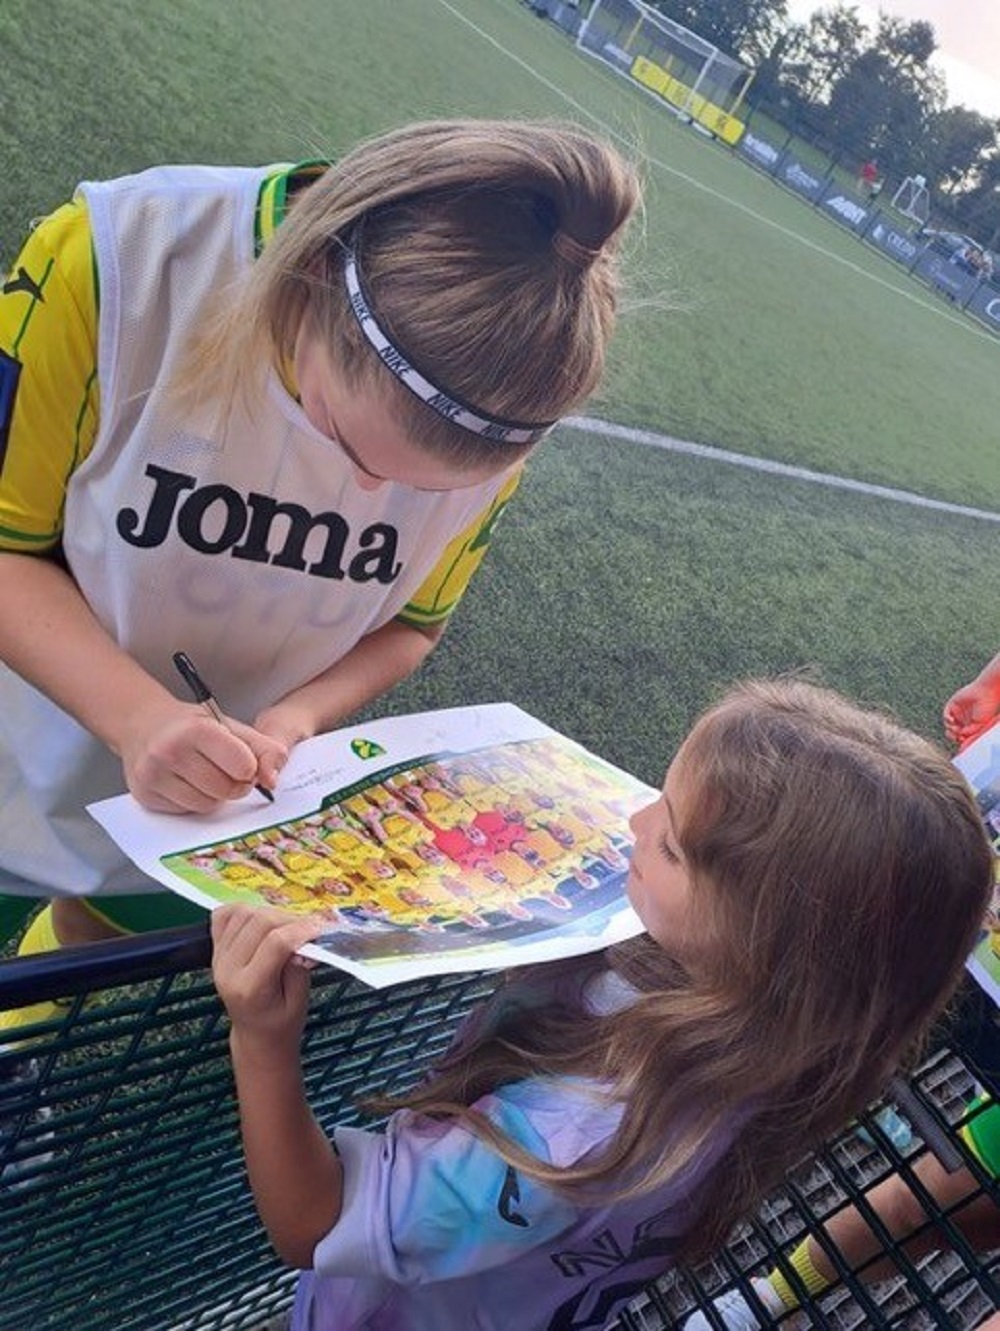 Girl having photo signed by a woman, who is wearing a headband